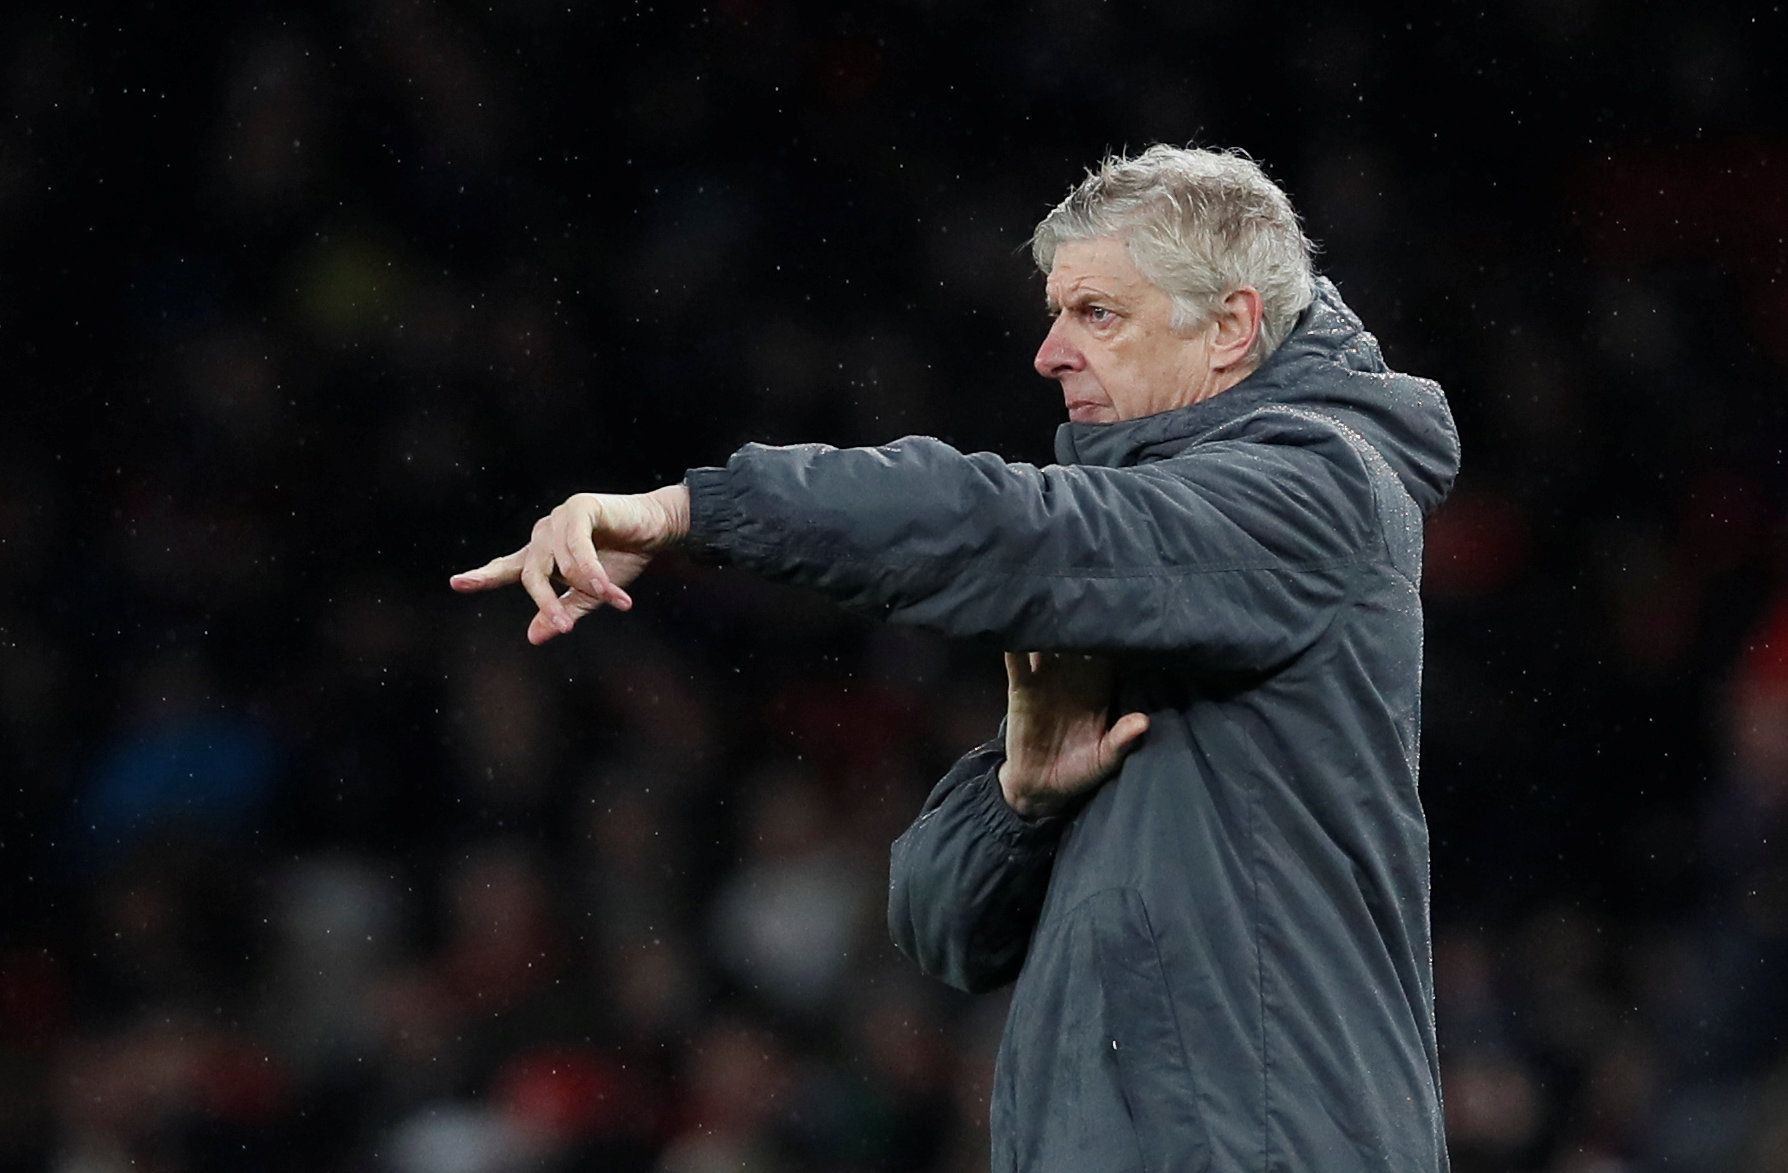 Soccer Football - Premier League - Arsenal vs Everton - Emirates Stadium, London, Britain - February 3, 2018   Arsenal manager Arsene Wenger    REUTERS/David Klein    EDITORIAL USE ONLY. No use with unauthorized audio, video, data, fixture lists, club/league logos or 